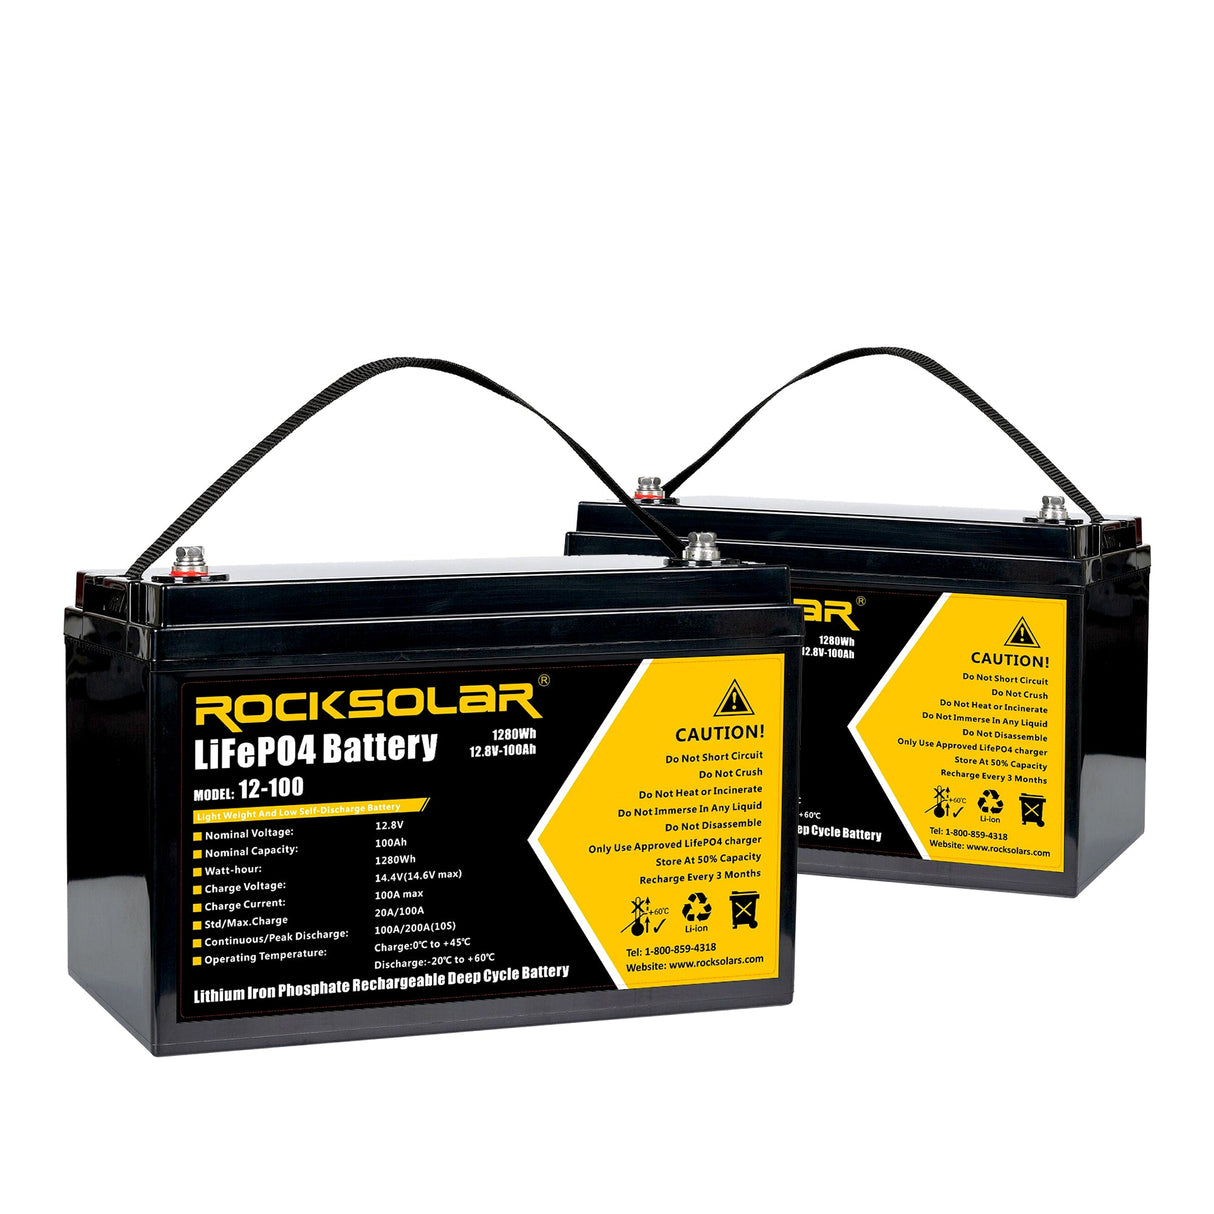 Get Best Performance with 24V 100AH LiFePO4 Battery – ROCKSOLAR